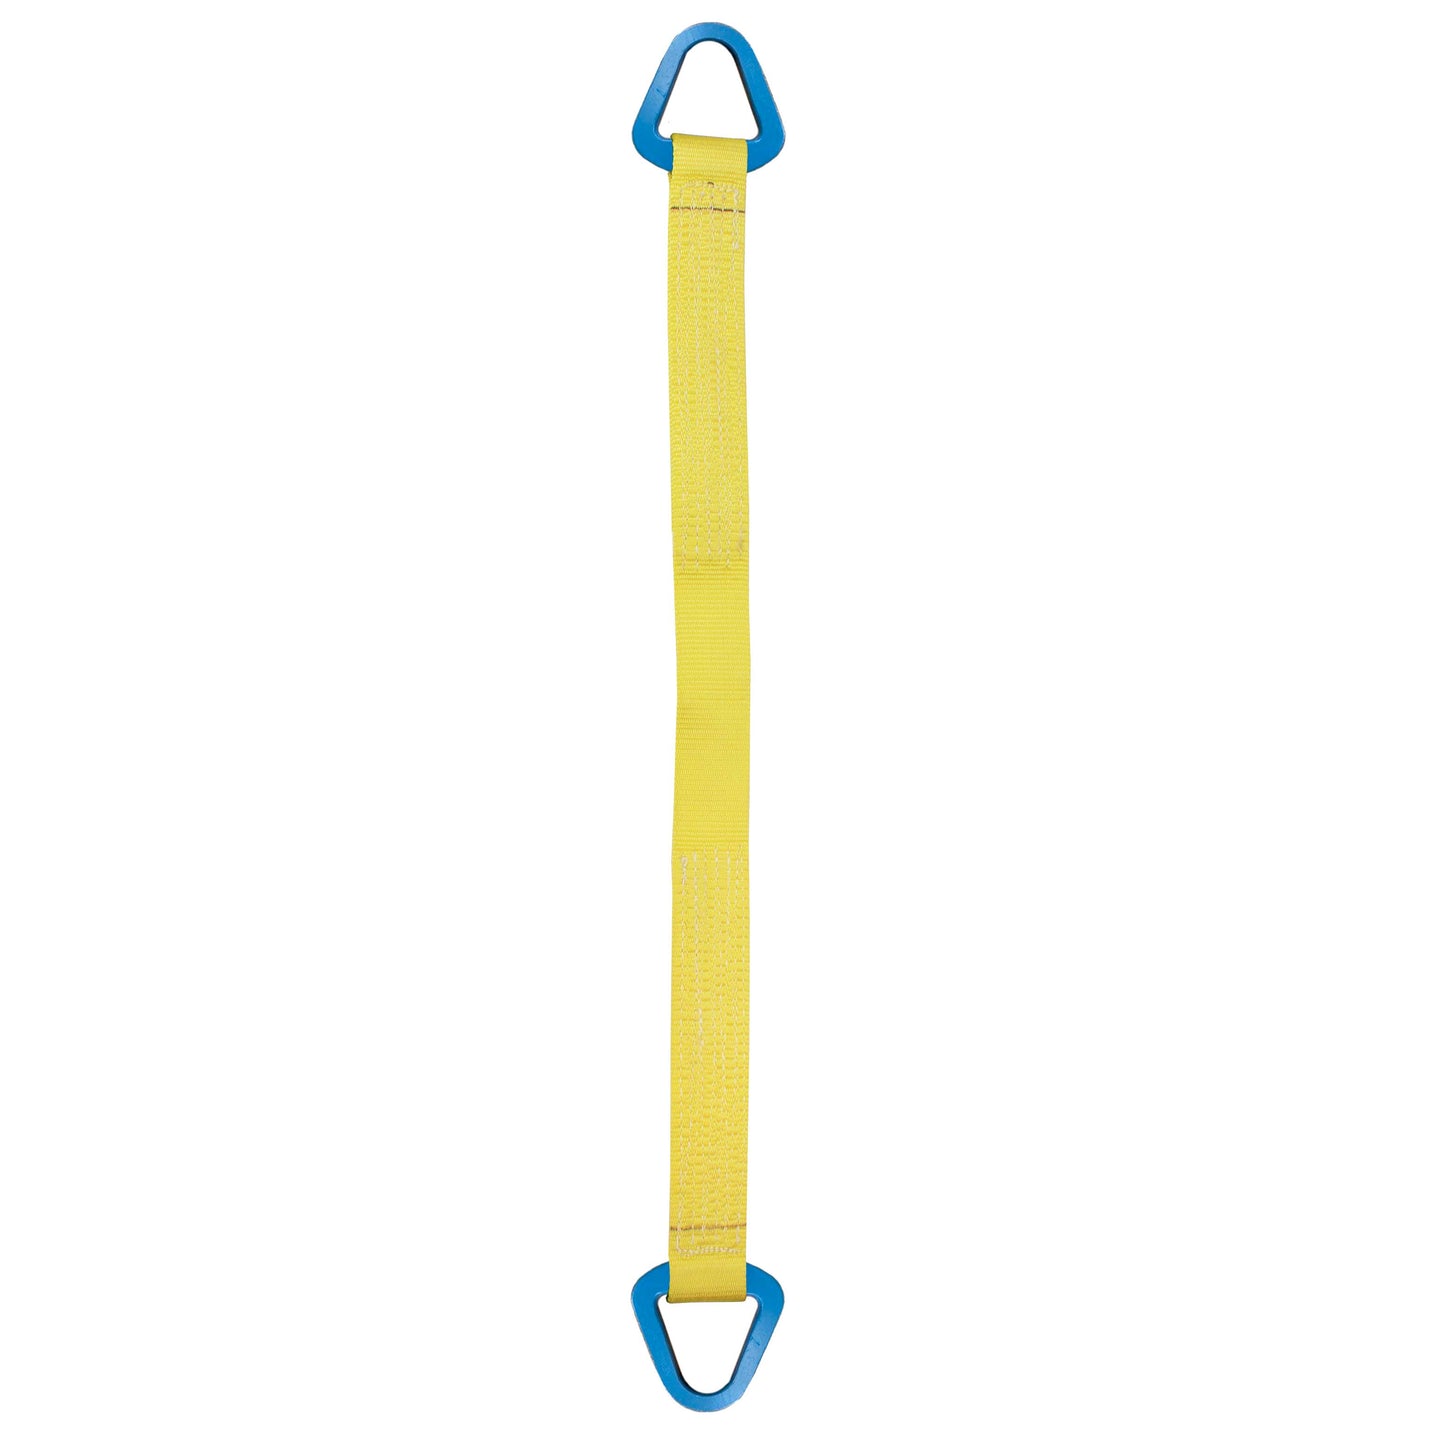 Nylon Lifting Sling Triangle 4 inch x 16 foot 2ply image 1 of 2